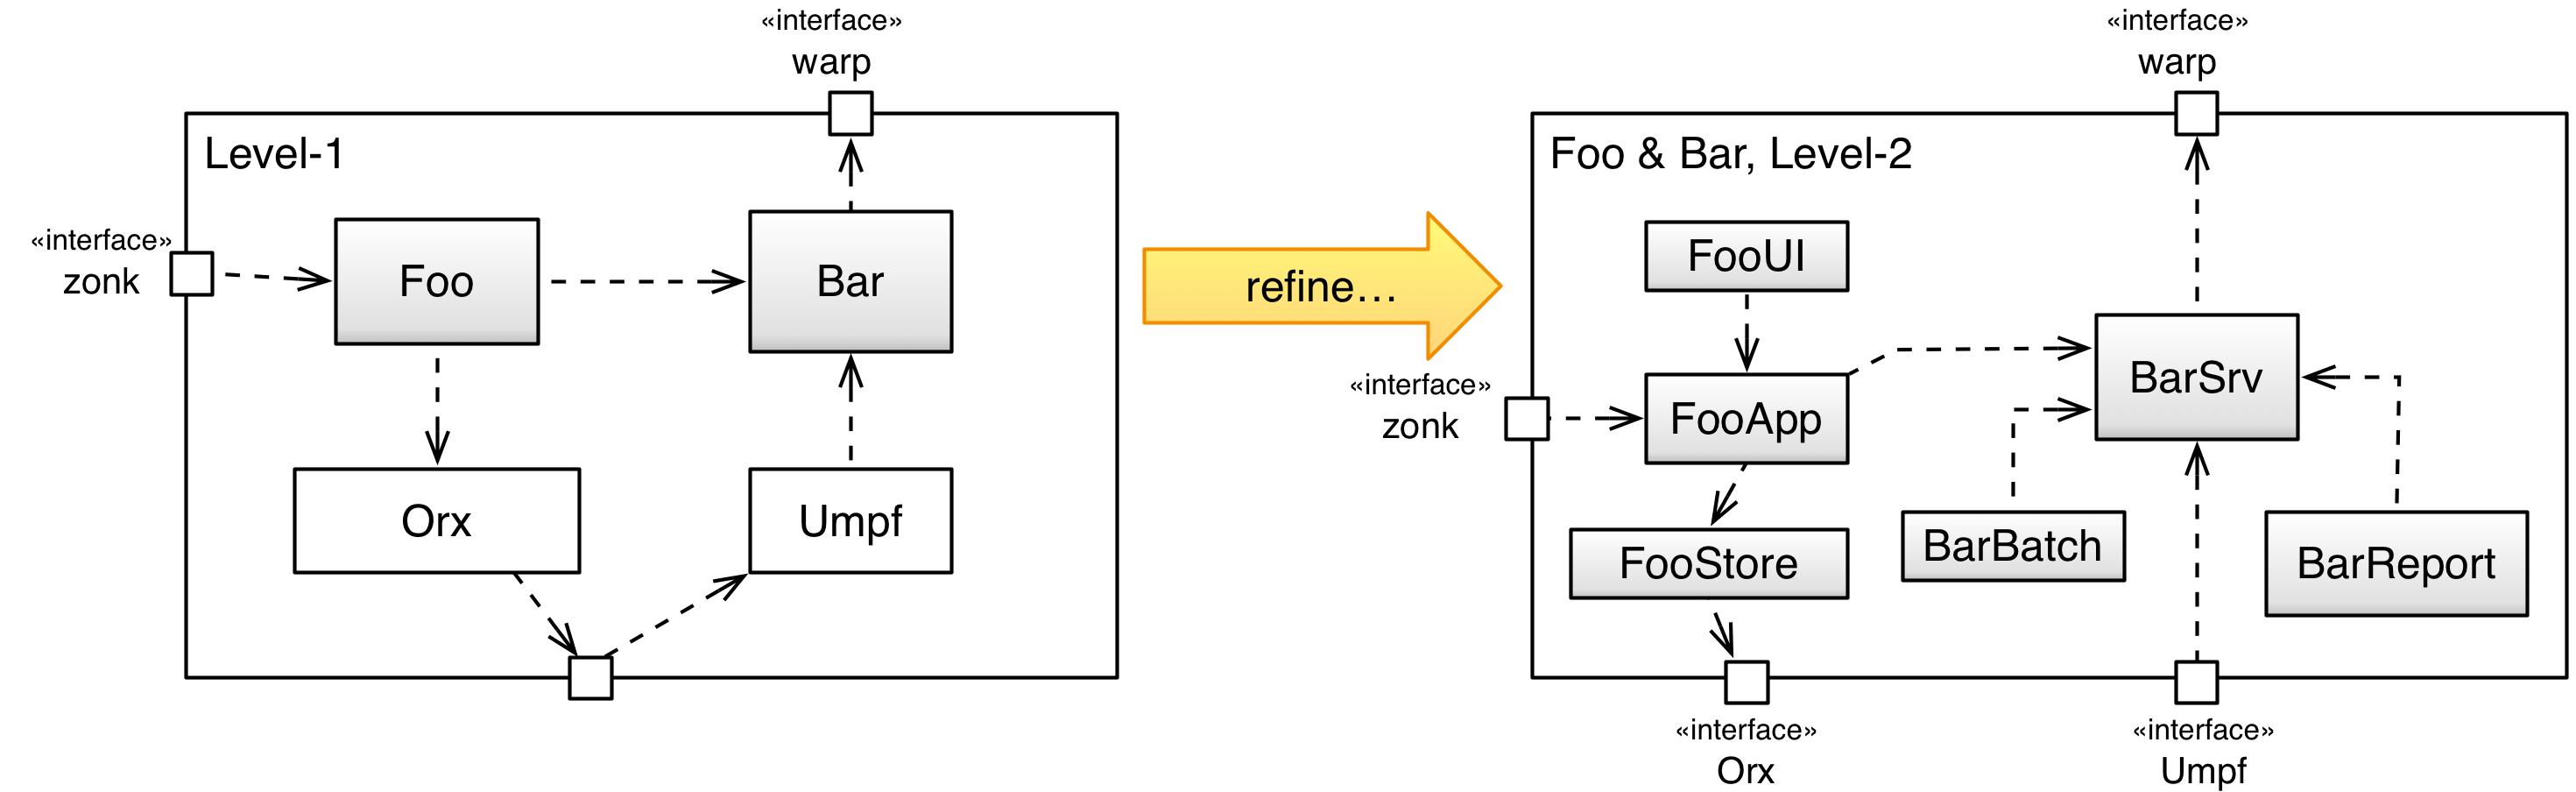 Refine two blackboxes together